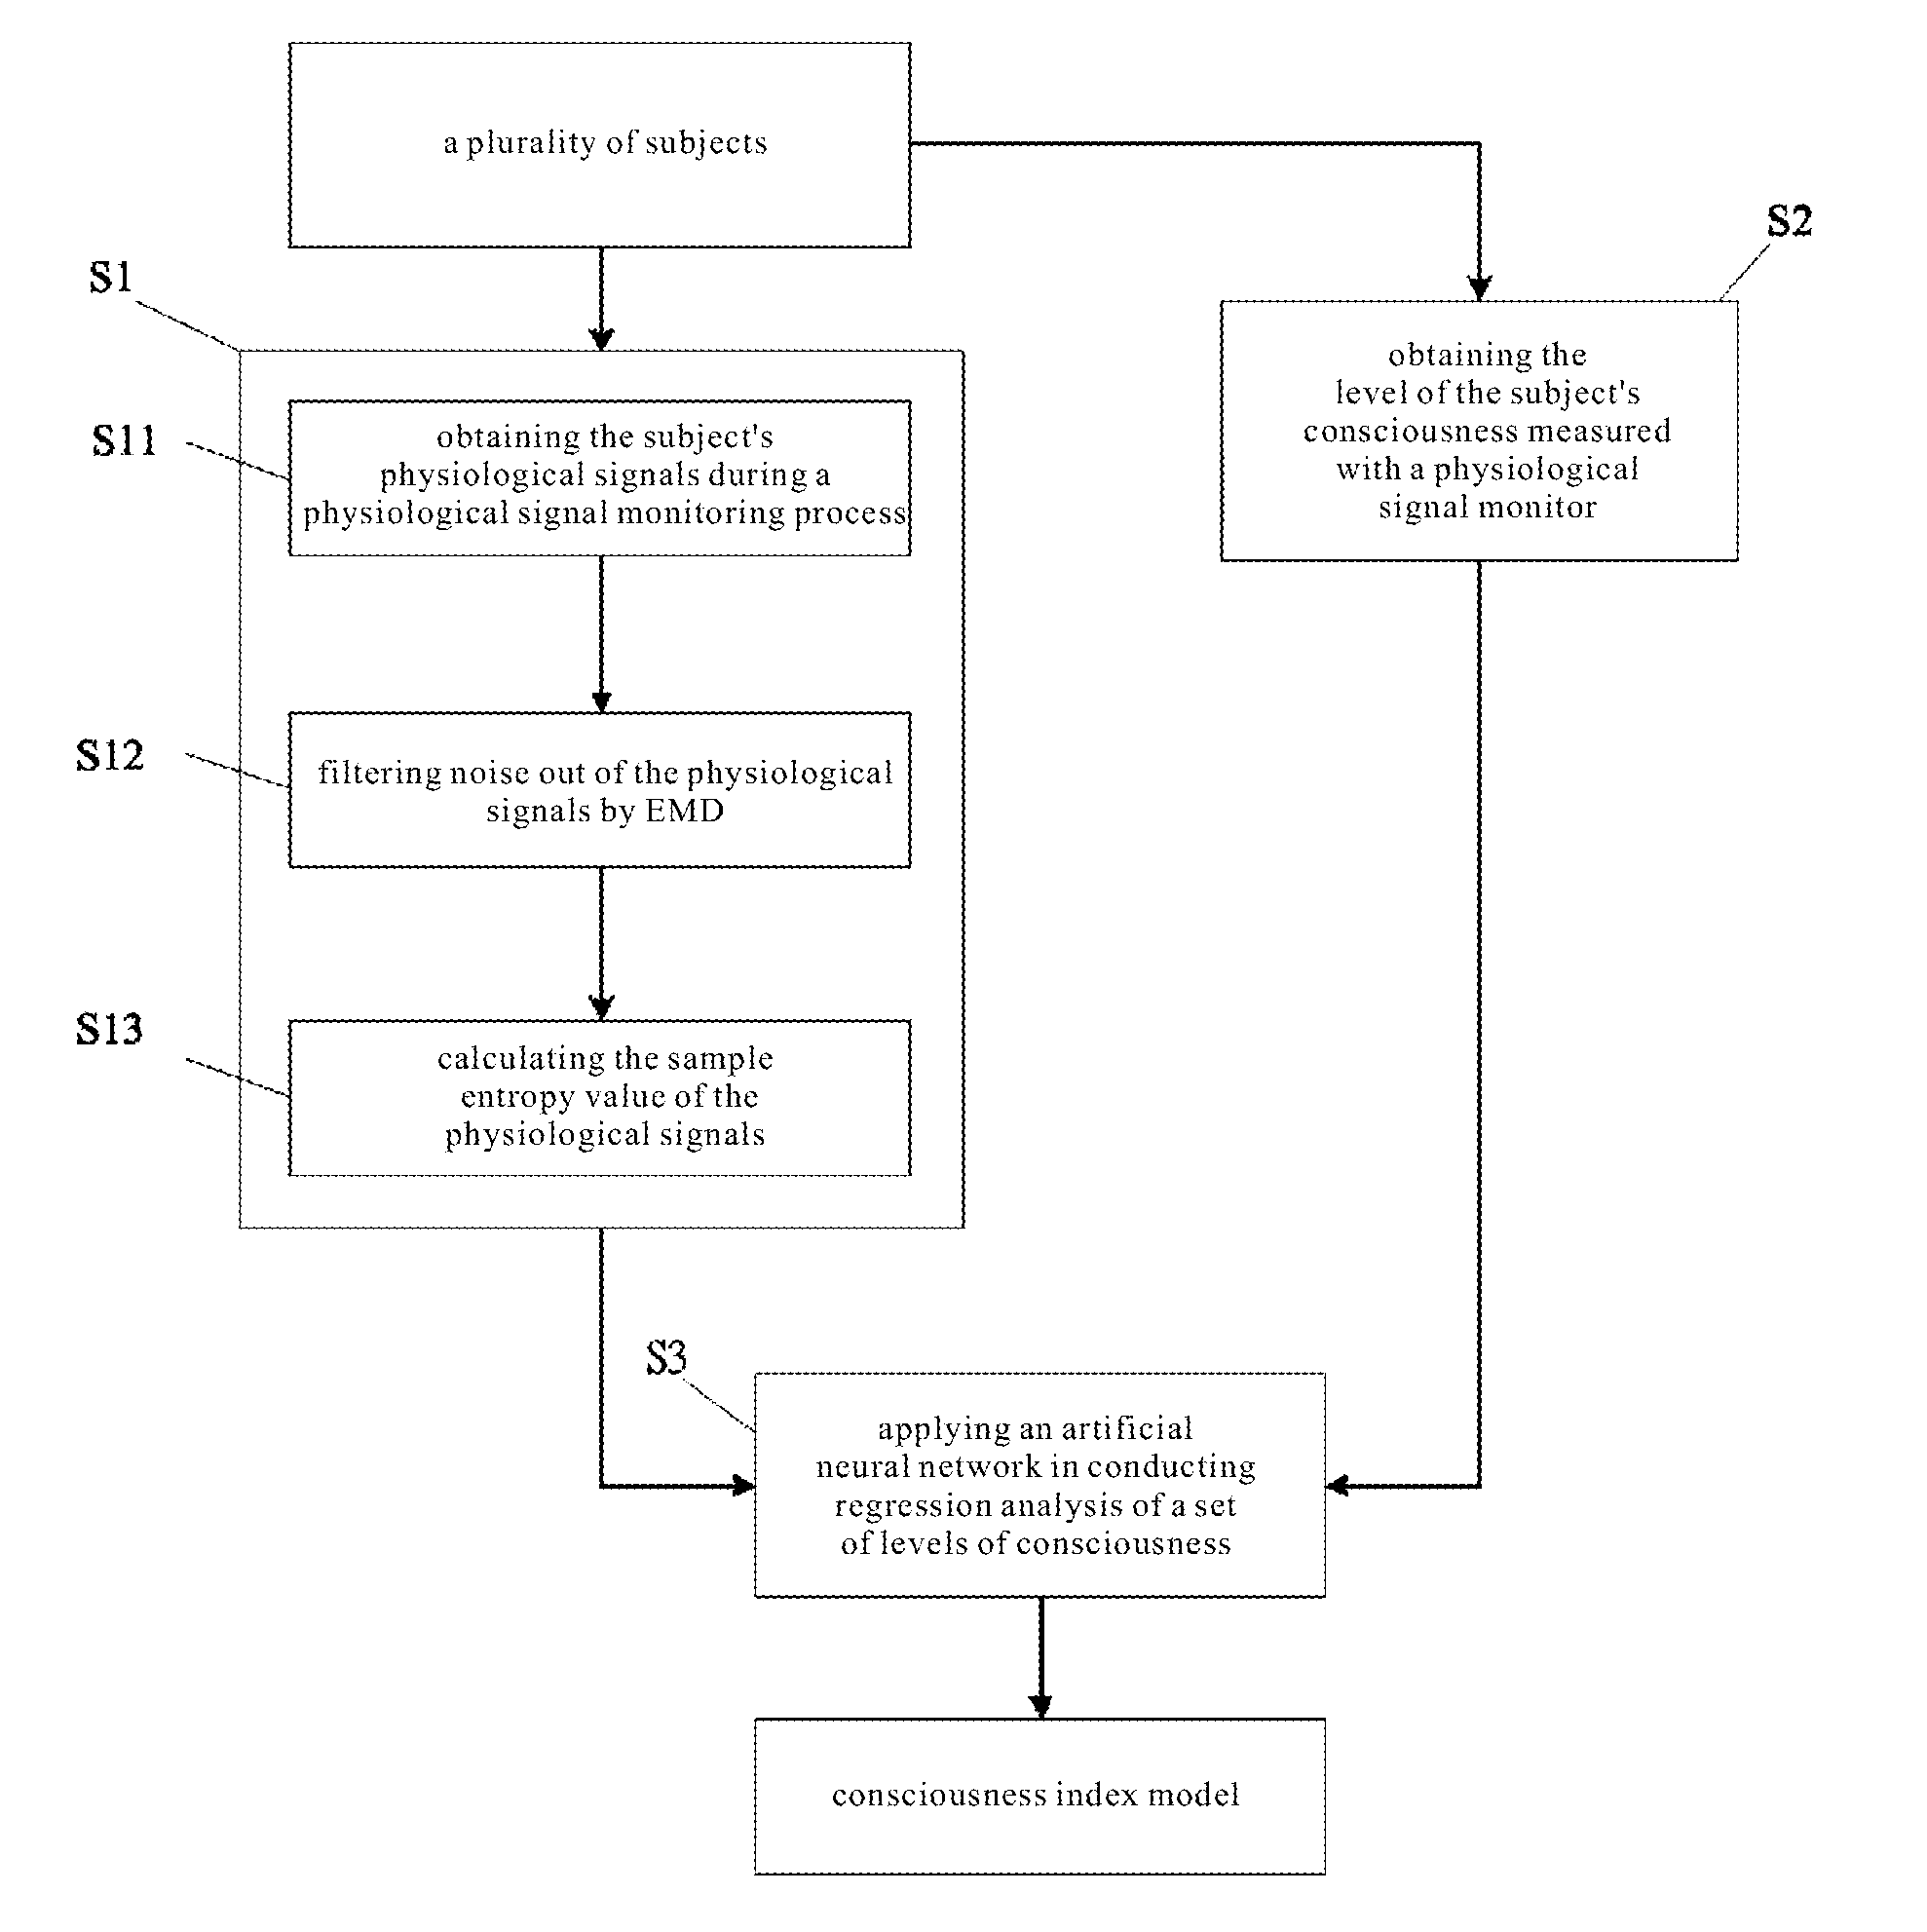 Method of creating anesthetic consciousness index with artificial neural network